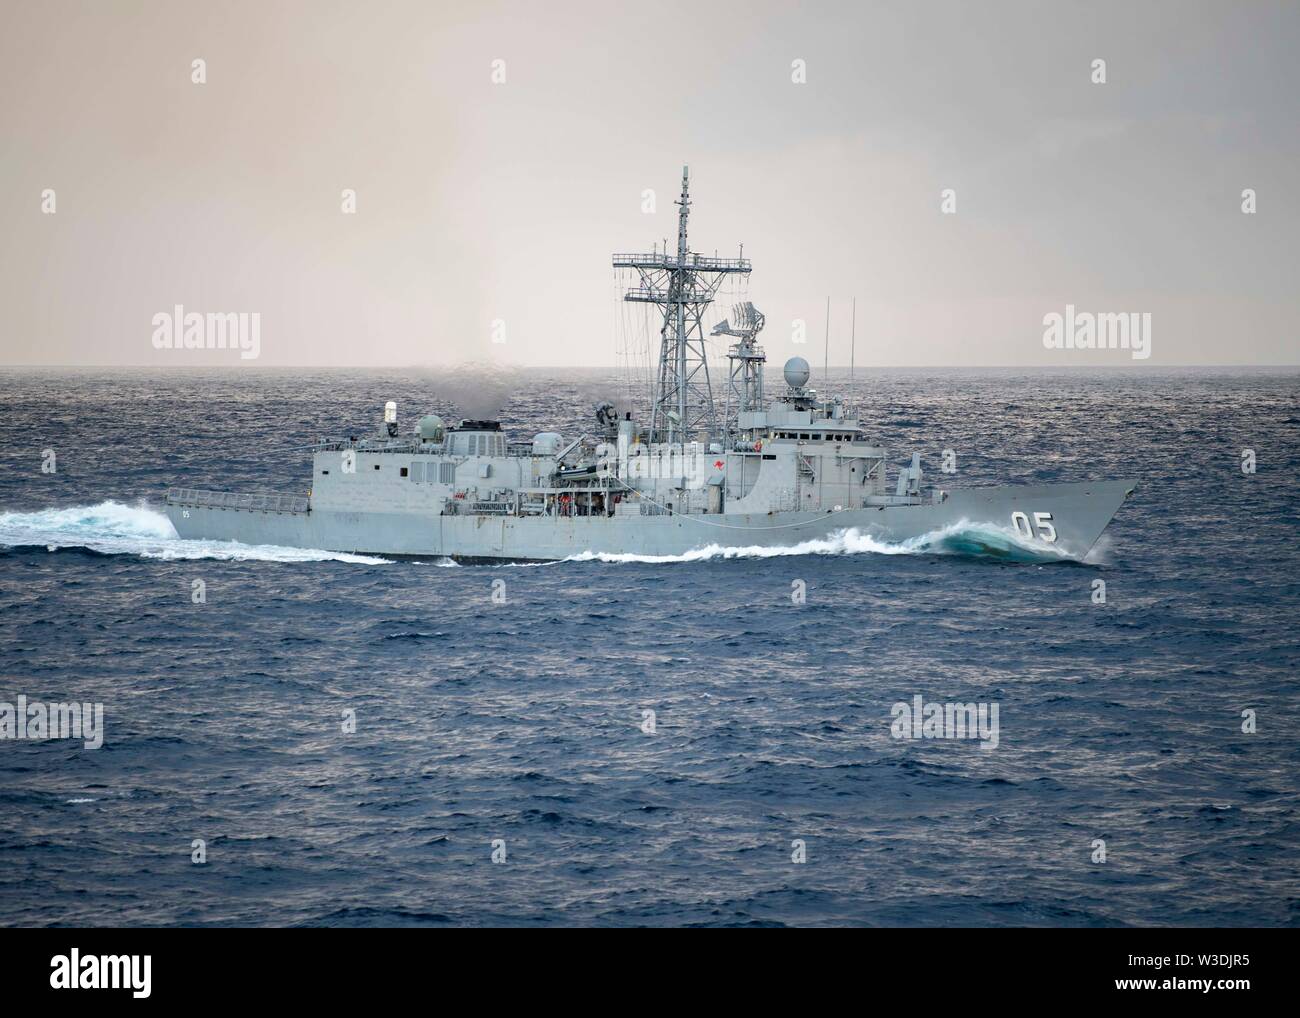 190711-N-WK982-1094 Coral Sea (July 11, 2019) The Royal Australian Navy Adelaide-class guided-missile frigate HMAS Melbourne (FFG 05) maneuvers into formation during Talisman Sabre 2019. Talisman Sabre 2019 illustrates the closeness of the Australian and U.S. alliance and the strength of the military-to-military relationship. This is the eighth iteration of this exercise. (U.S. Navy photo by Mass Communication Specialist 2nd Class John Harris/Released) Stock Photo